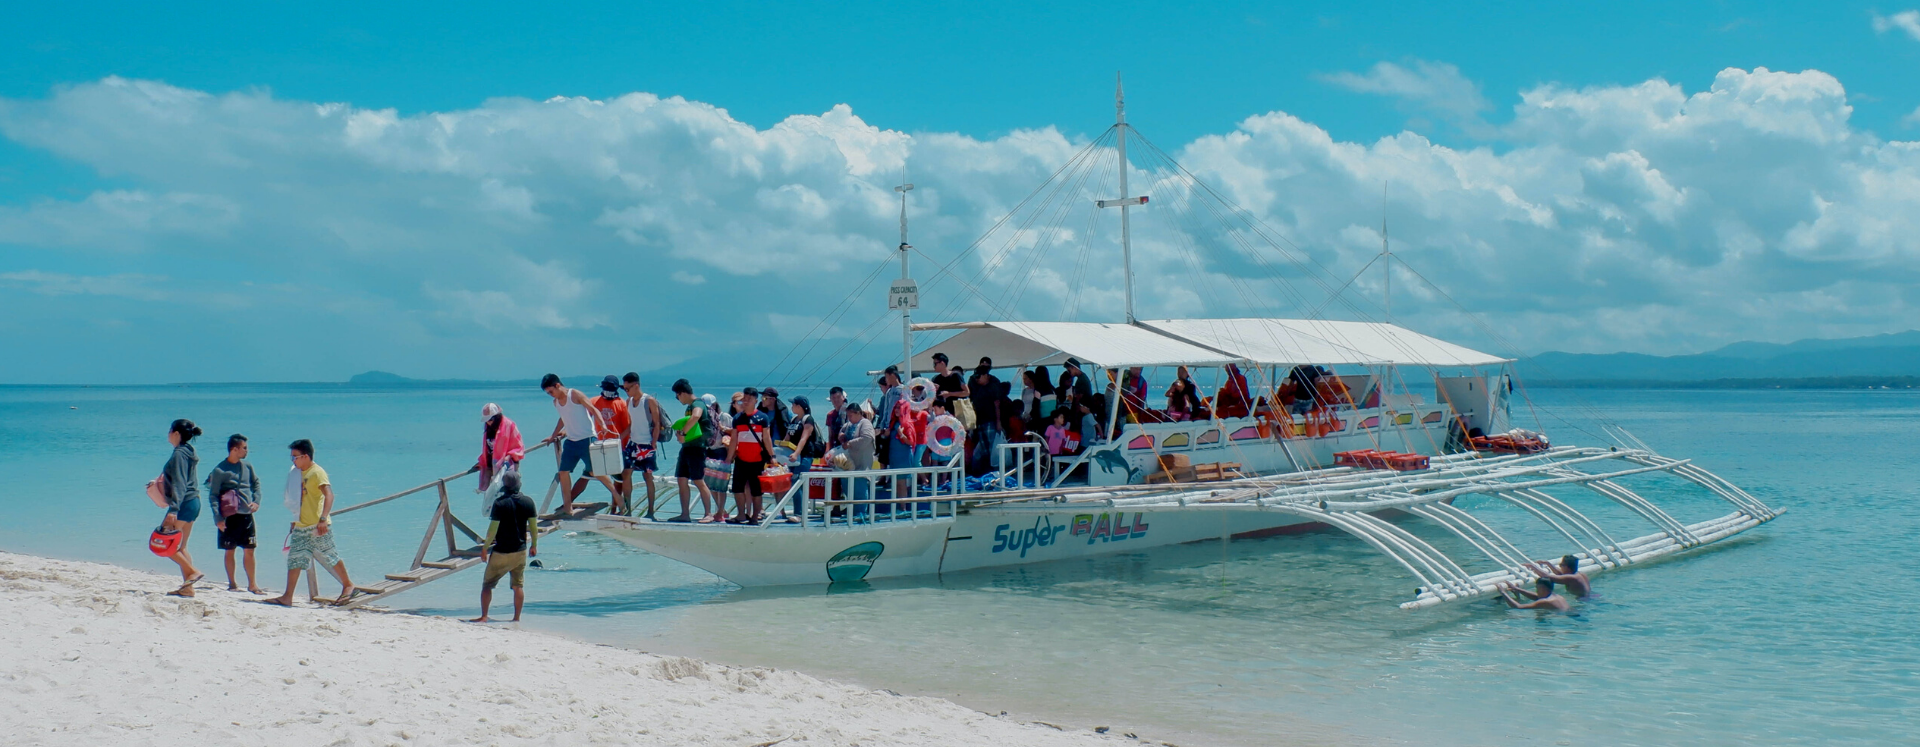 Tours et excursions Visite Voyage Philippines Island Hopping